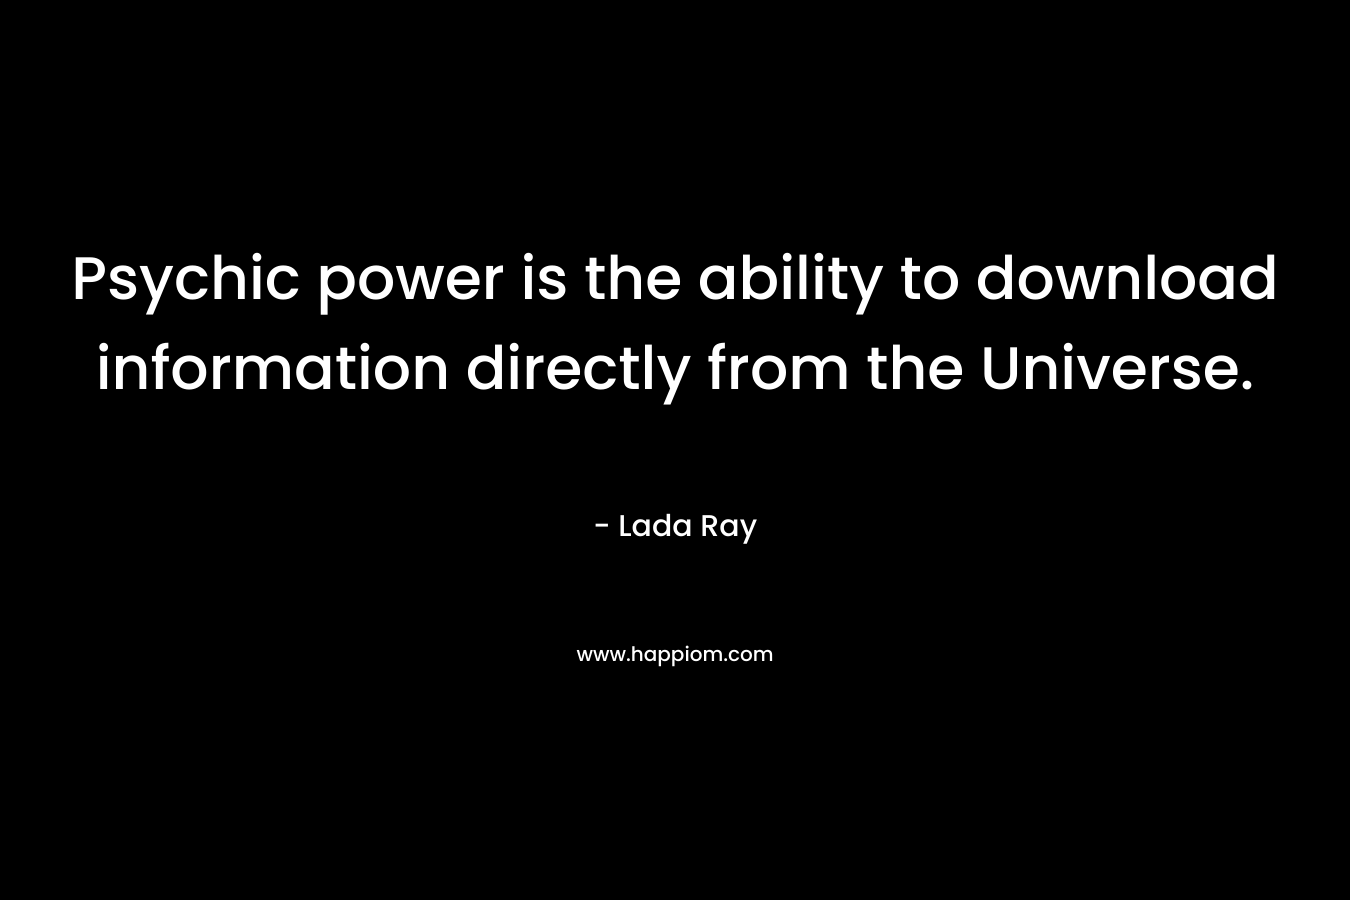 Psychic power is the ability to download information directly from the Universe. – Lada Ray